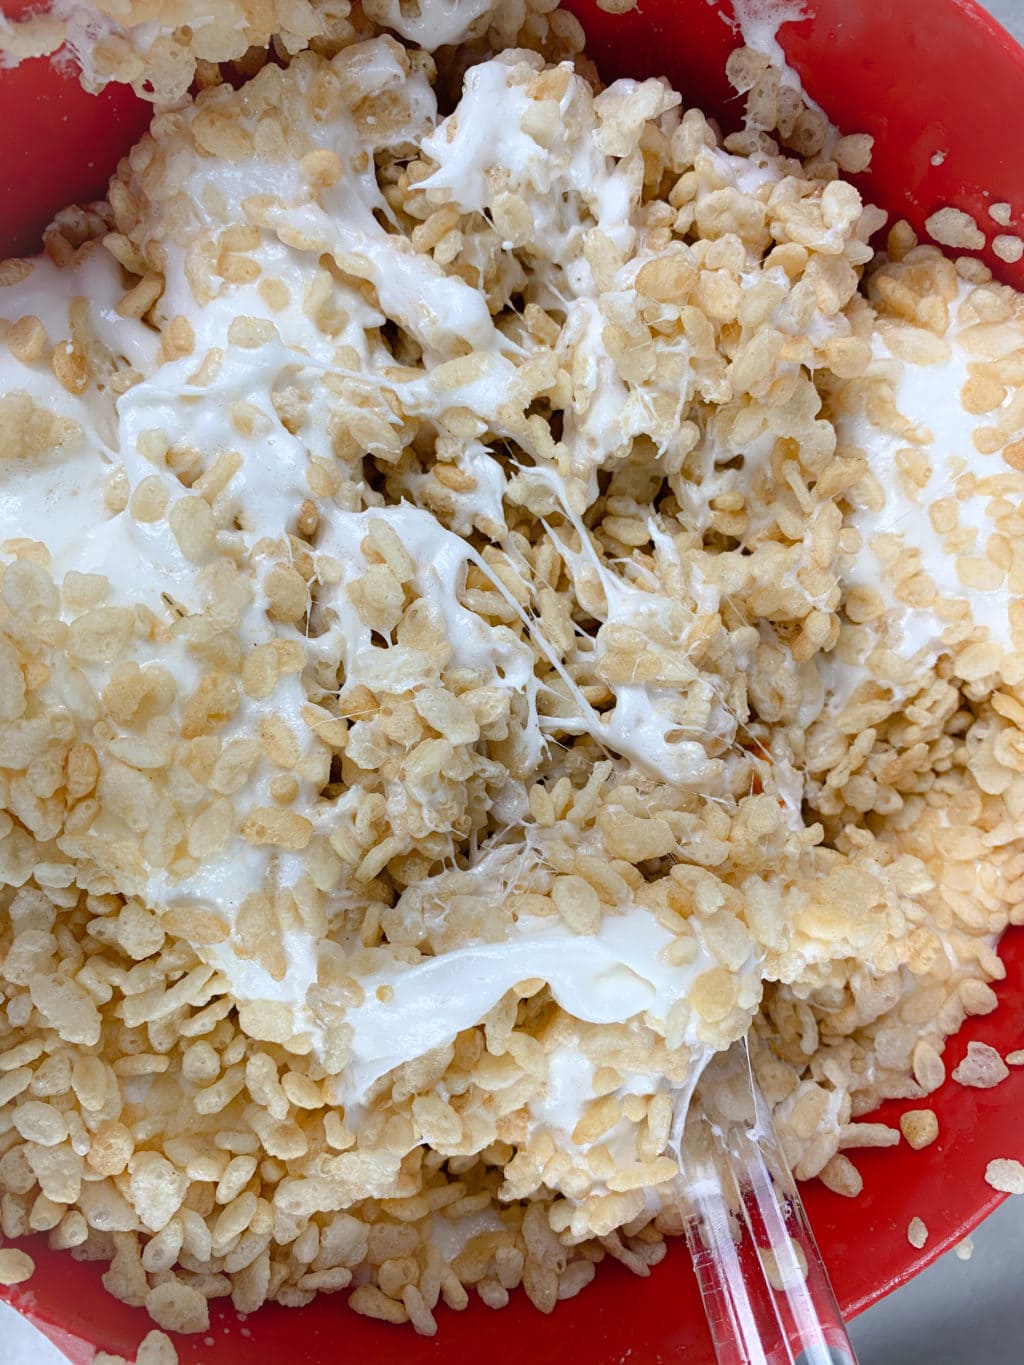 Showing rice krispies mixed with melted marshmallows in red bowl. 